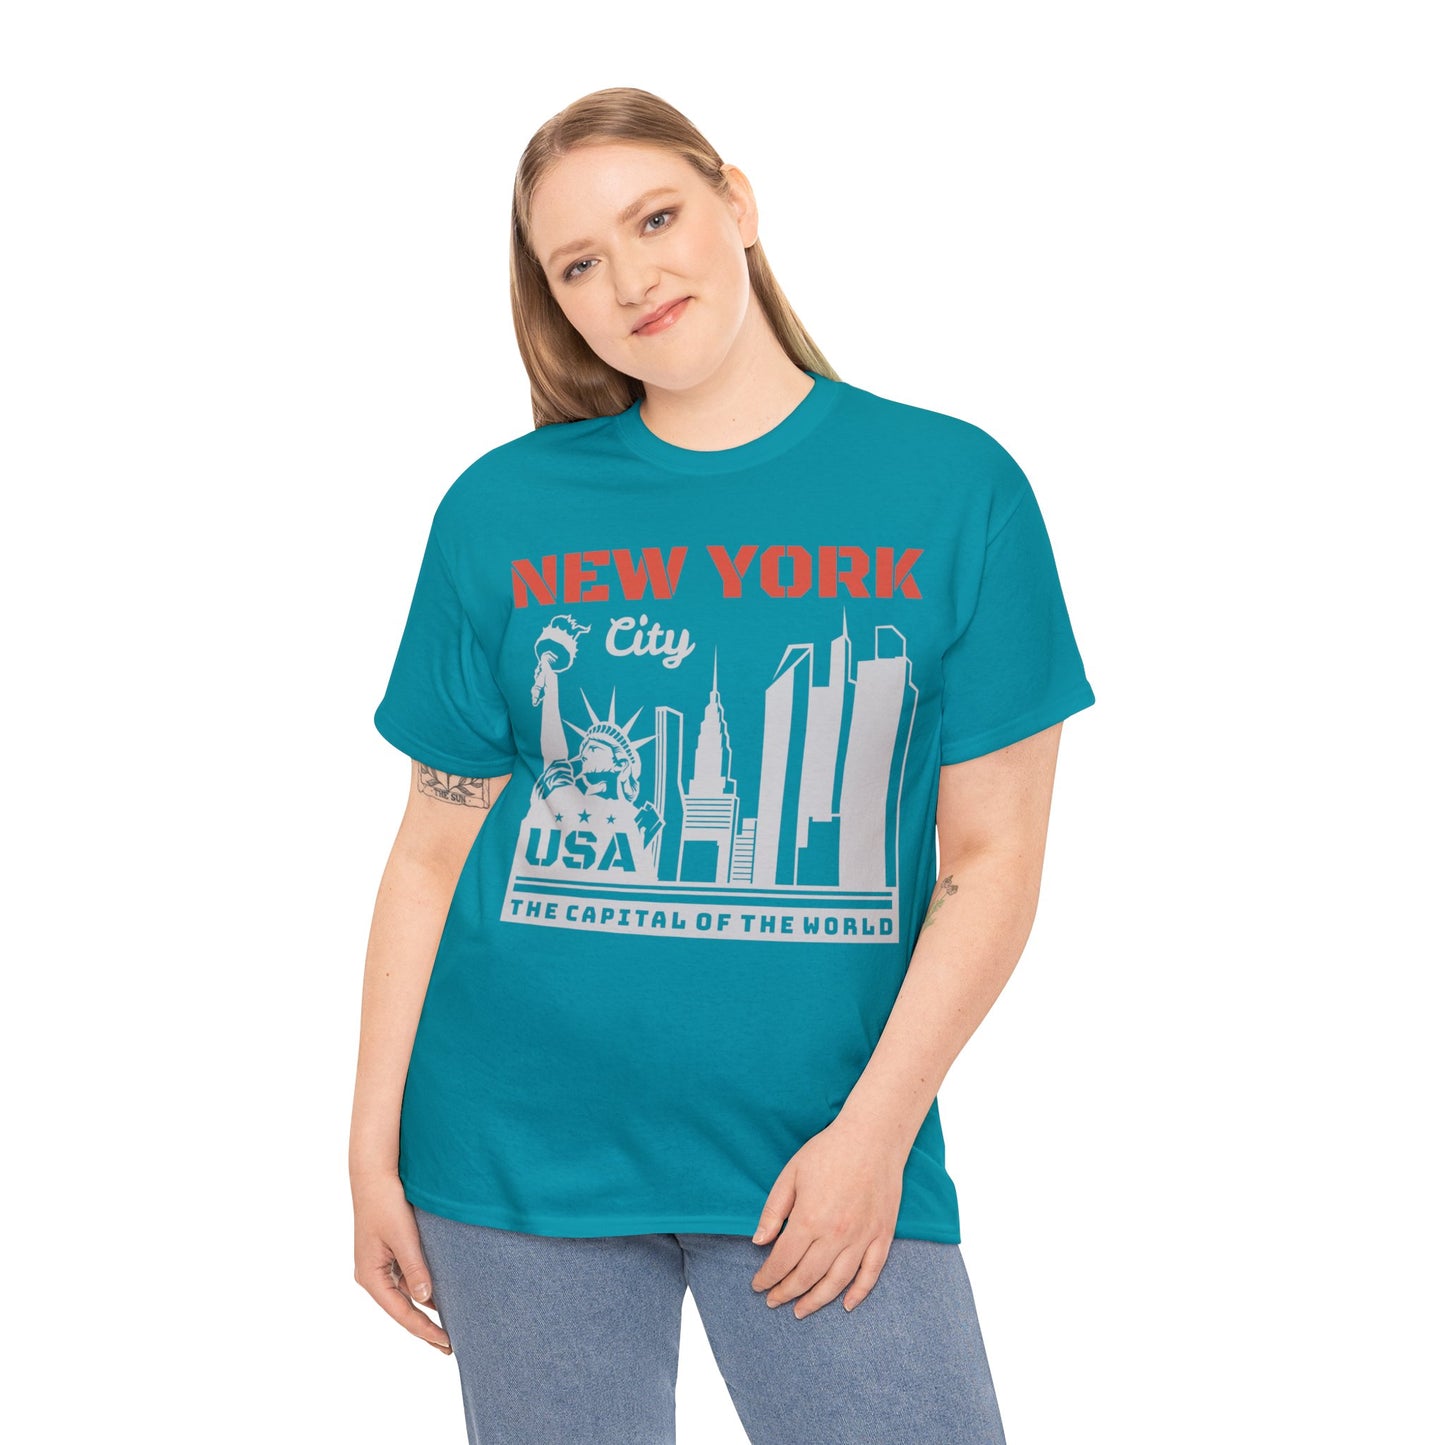 Explore the City That Never Sleeps with Our Stylish New York City T-Shirt